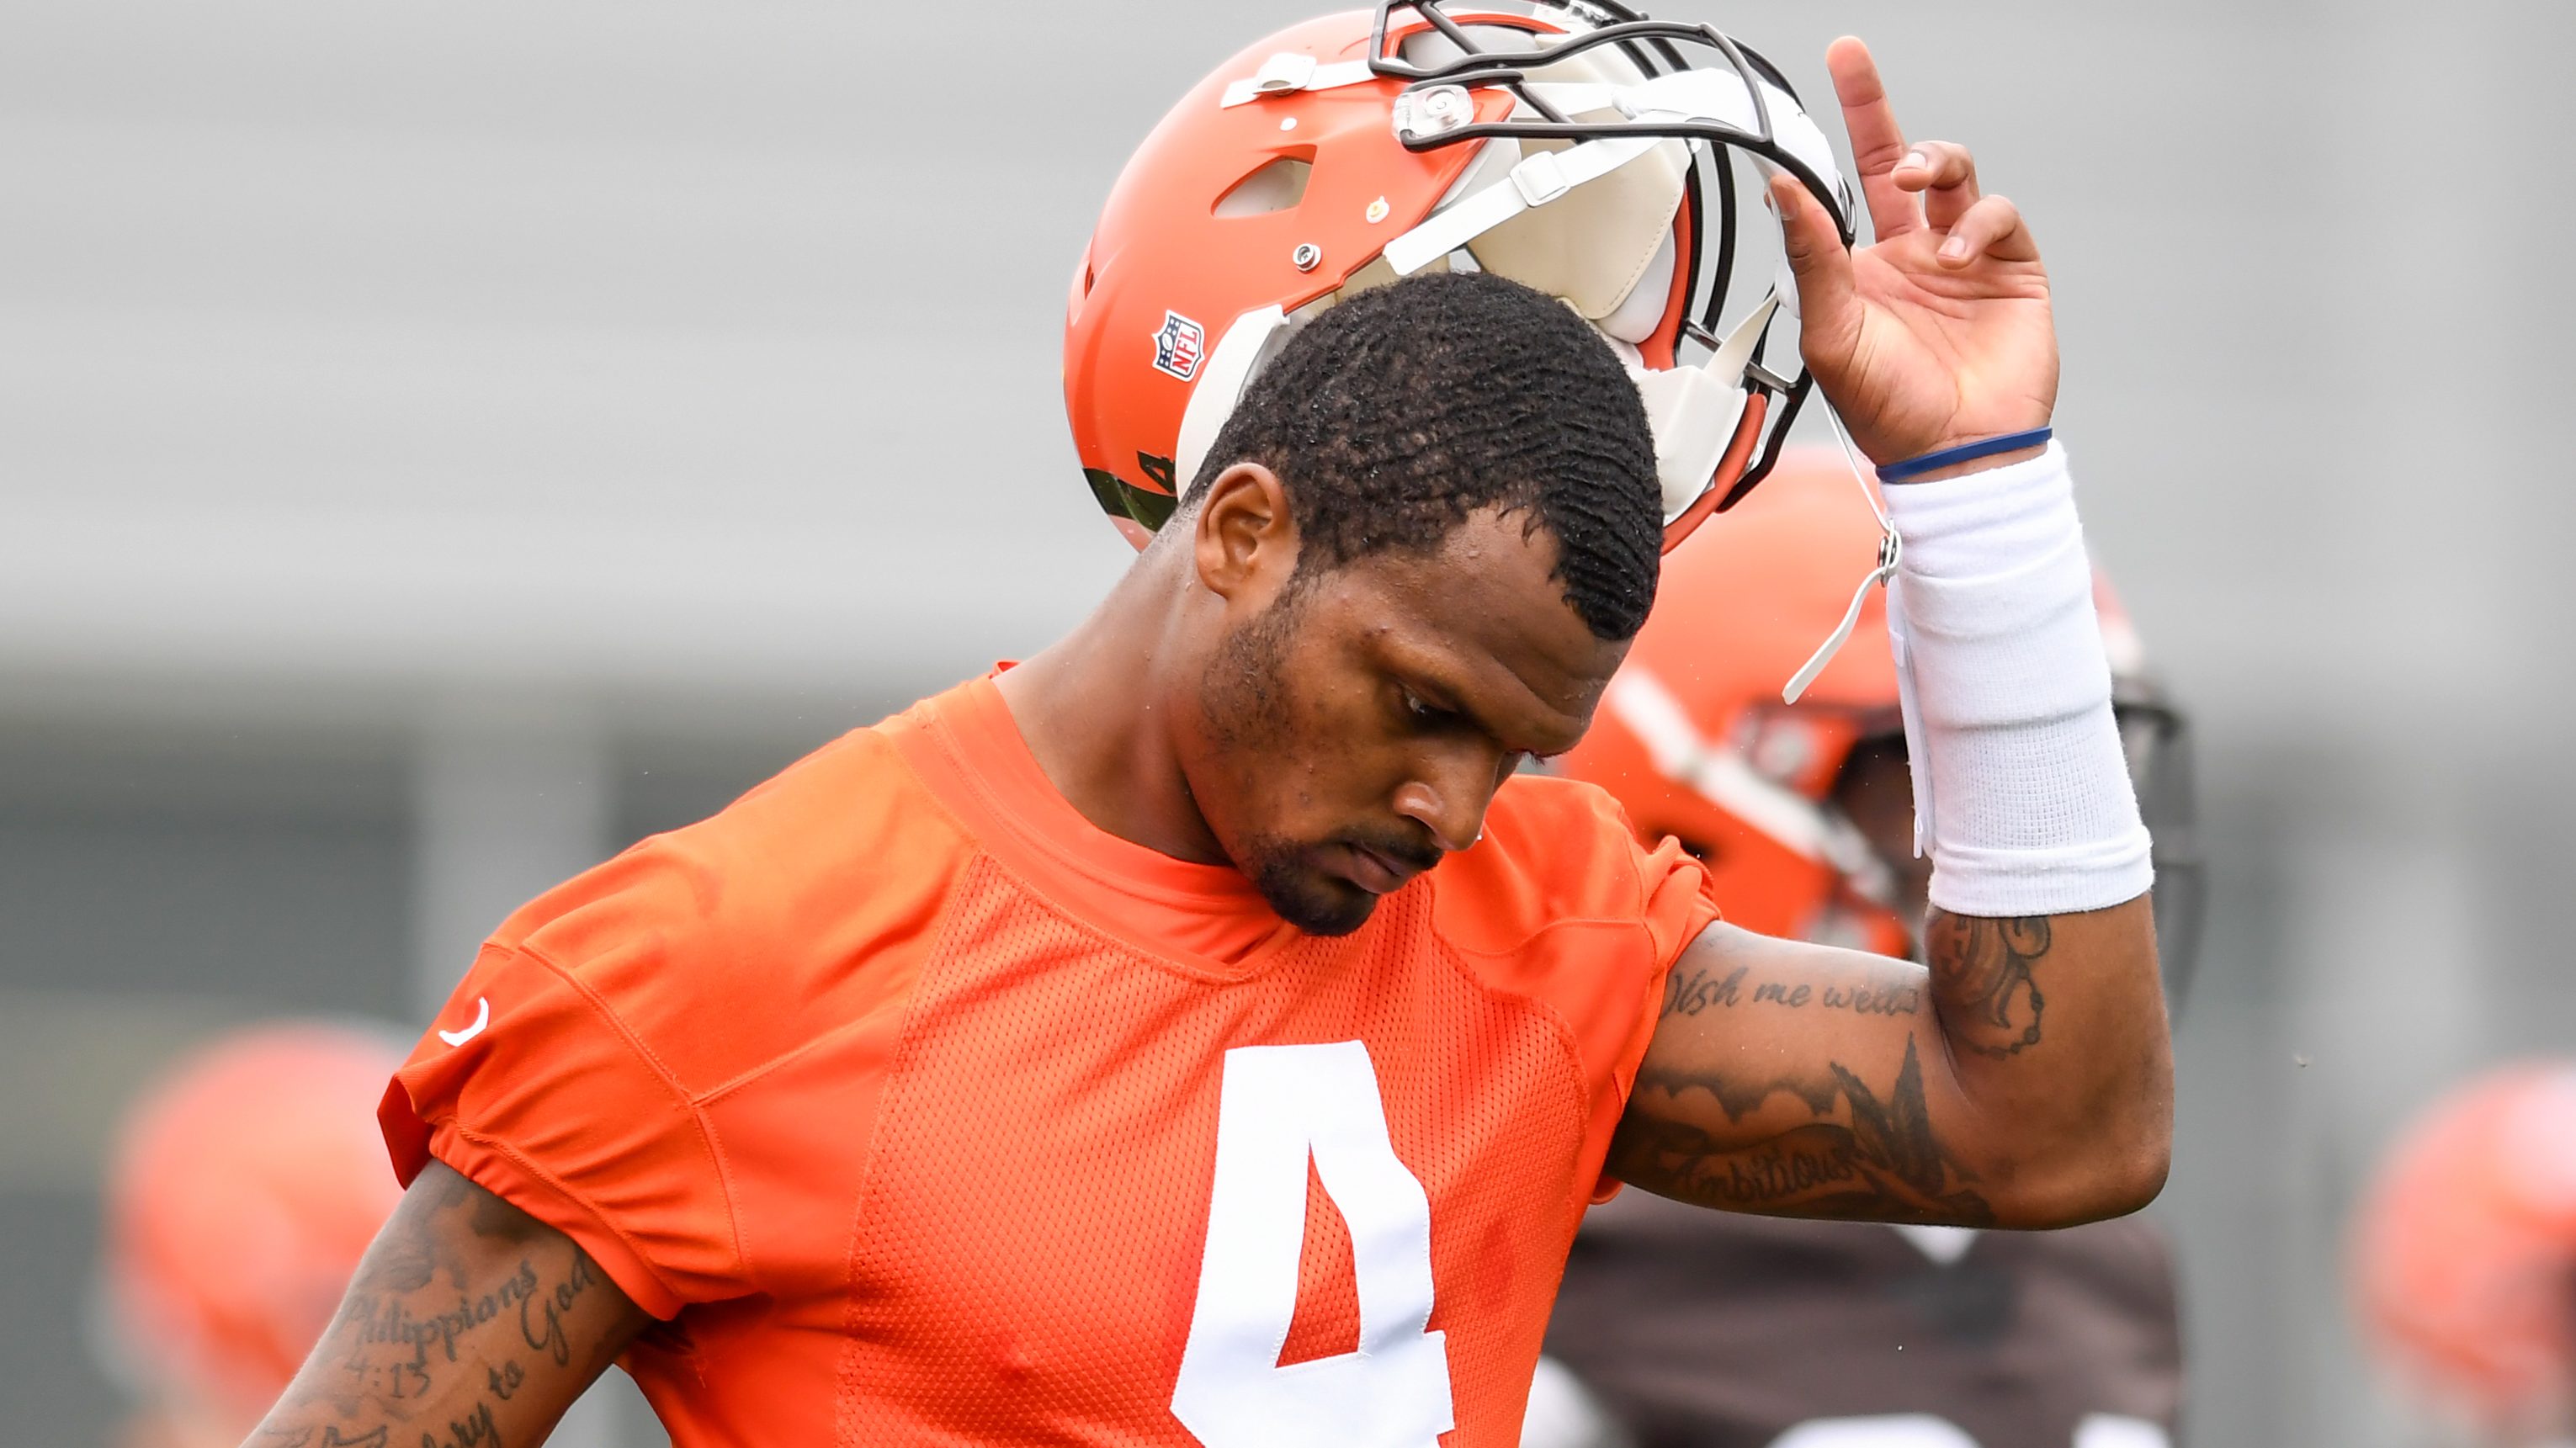 Deshaun Watson #4 of the Cleveland Browns takes off his helmet as he warms up during the Cleveland Browns mandatory minicamp at CrossCountry Mortgage Campus on June 14, 2022 in Berea, Ohio.